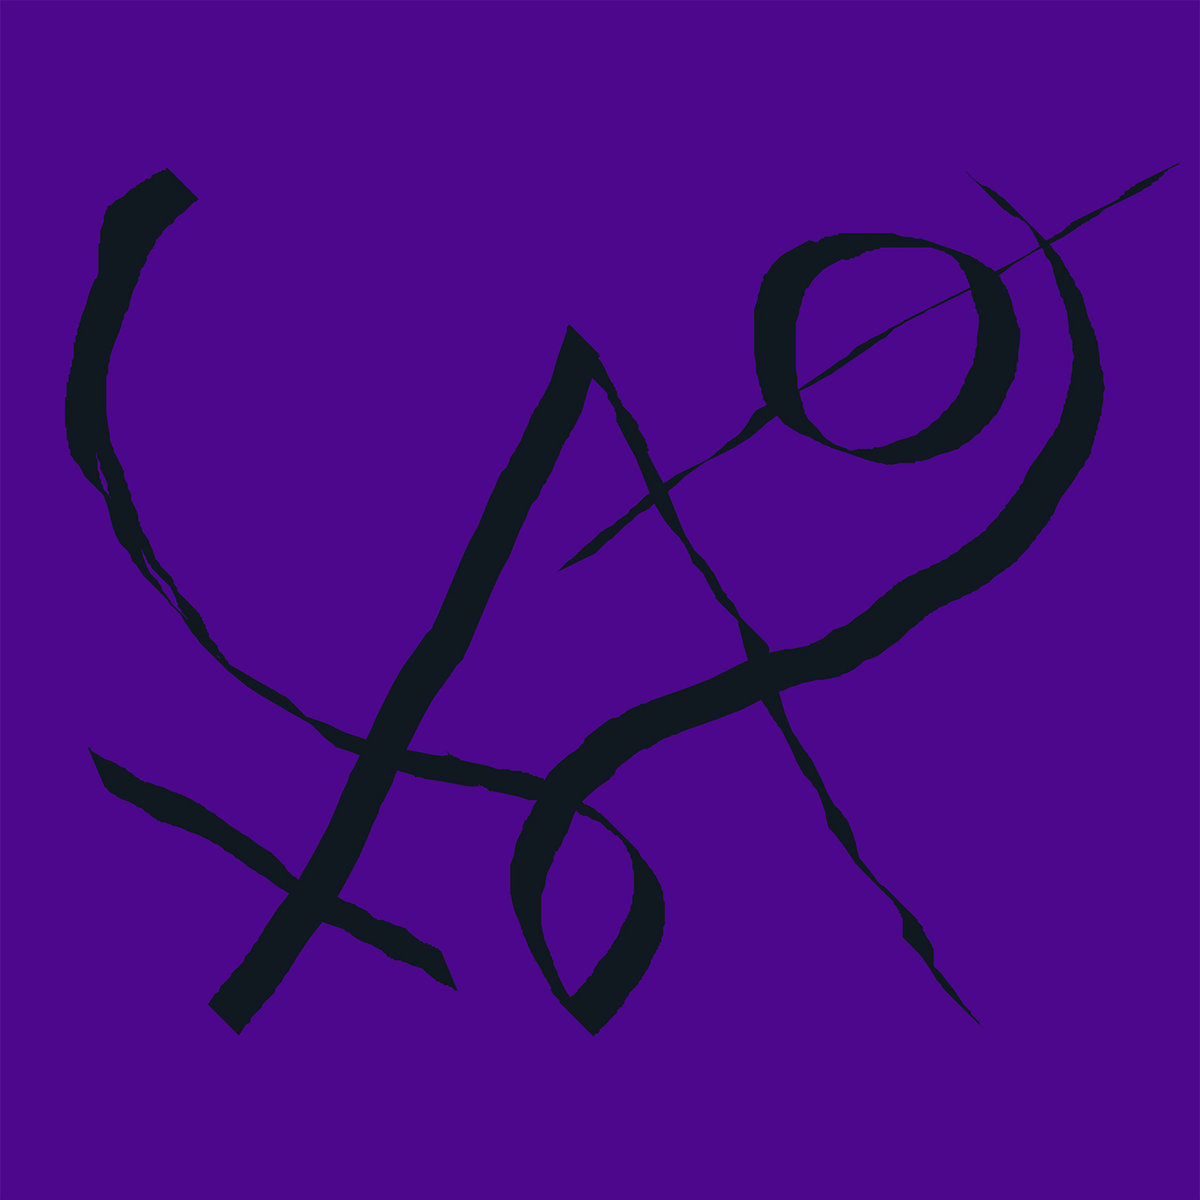 ﻿Inaccessibility Or: Why I’m Unable to Review Xiu Xiu